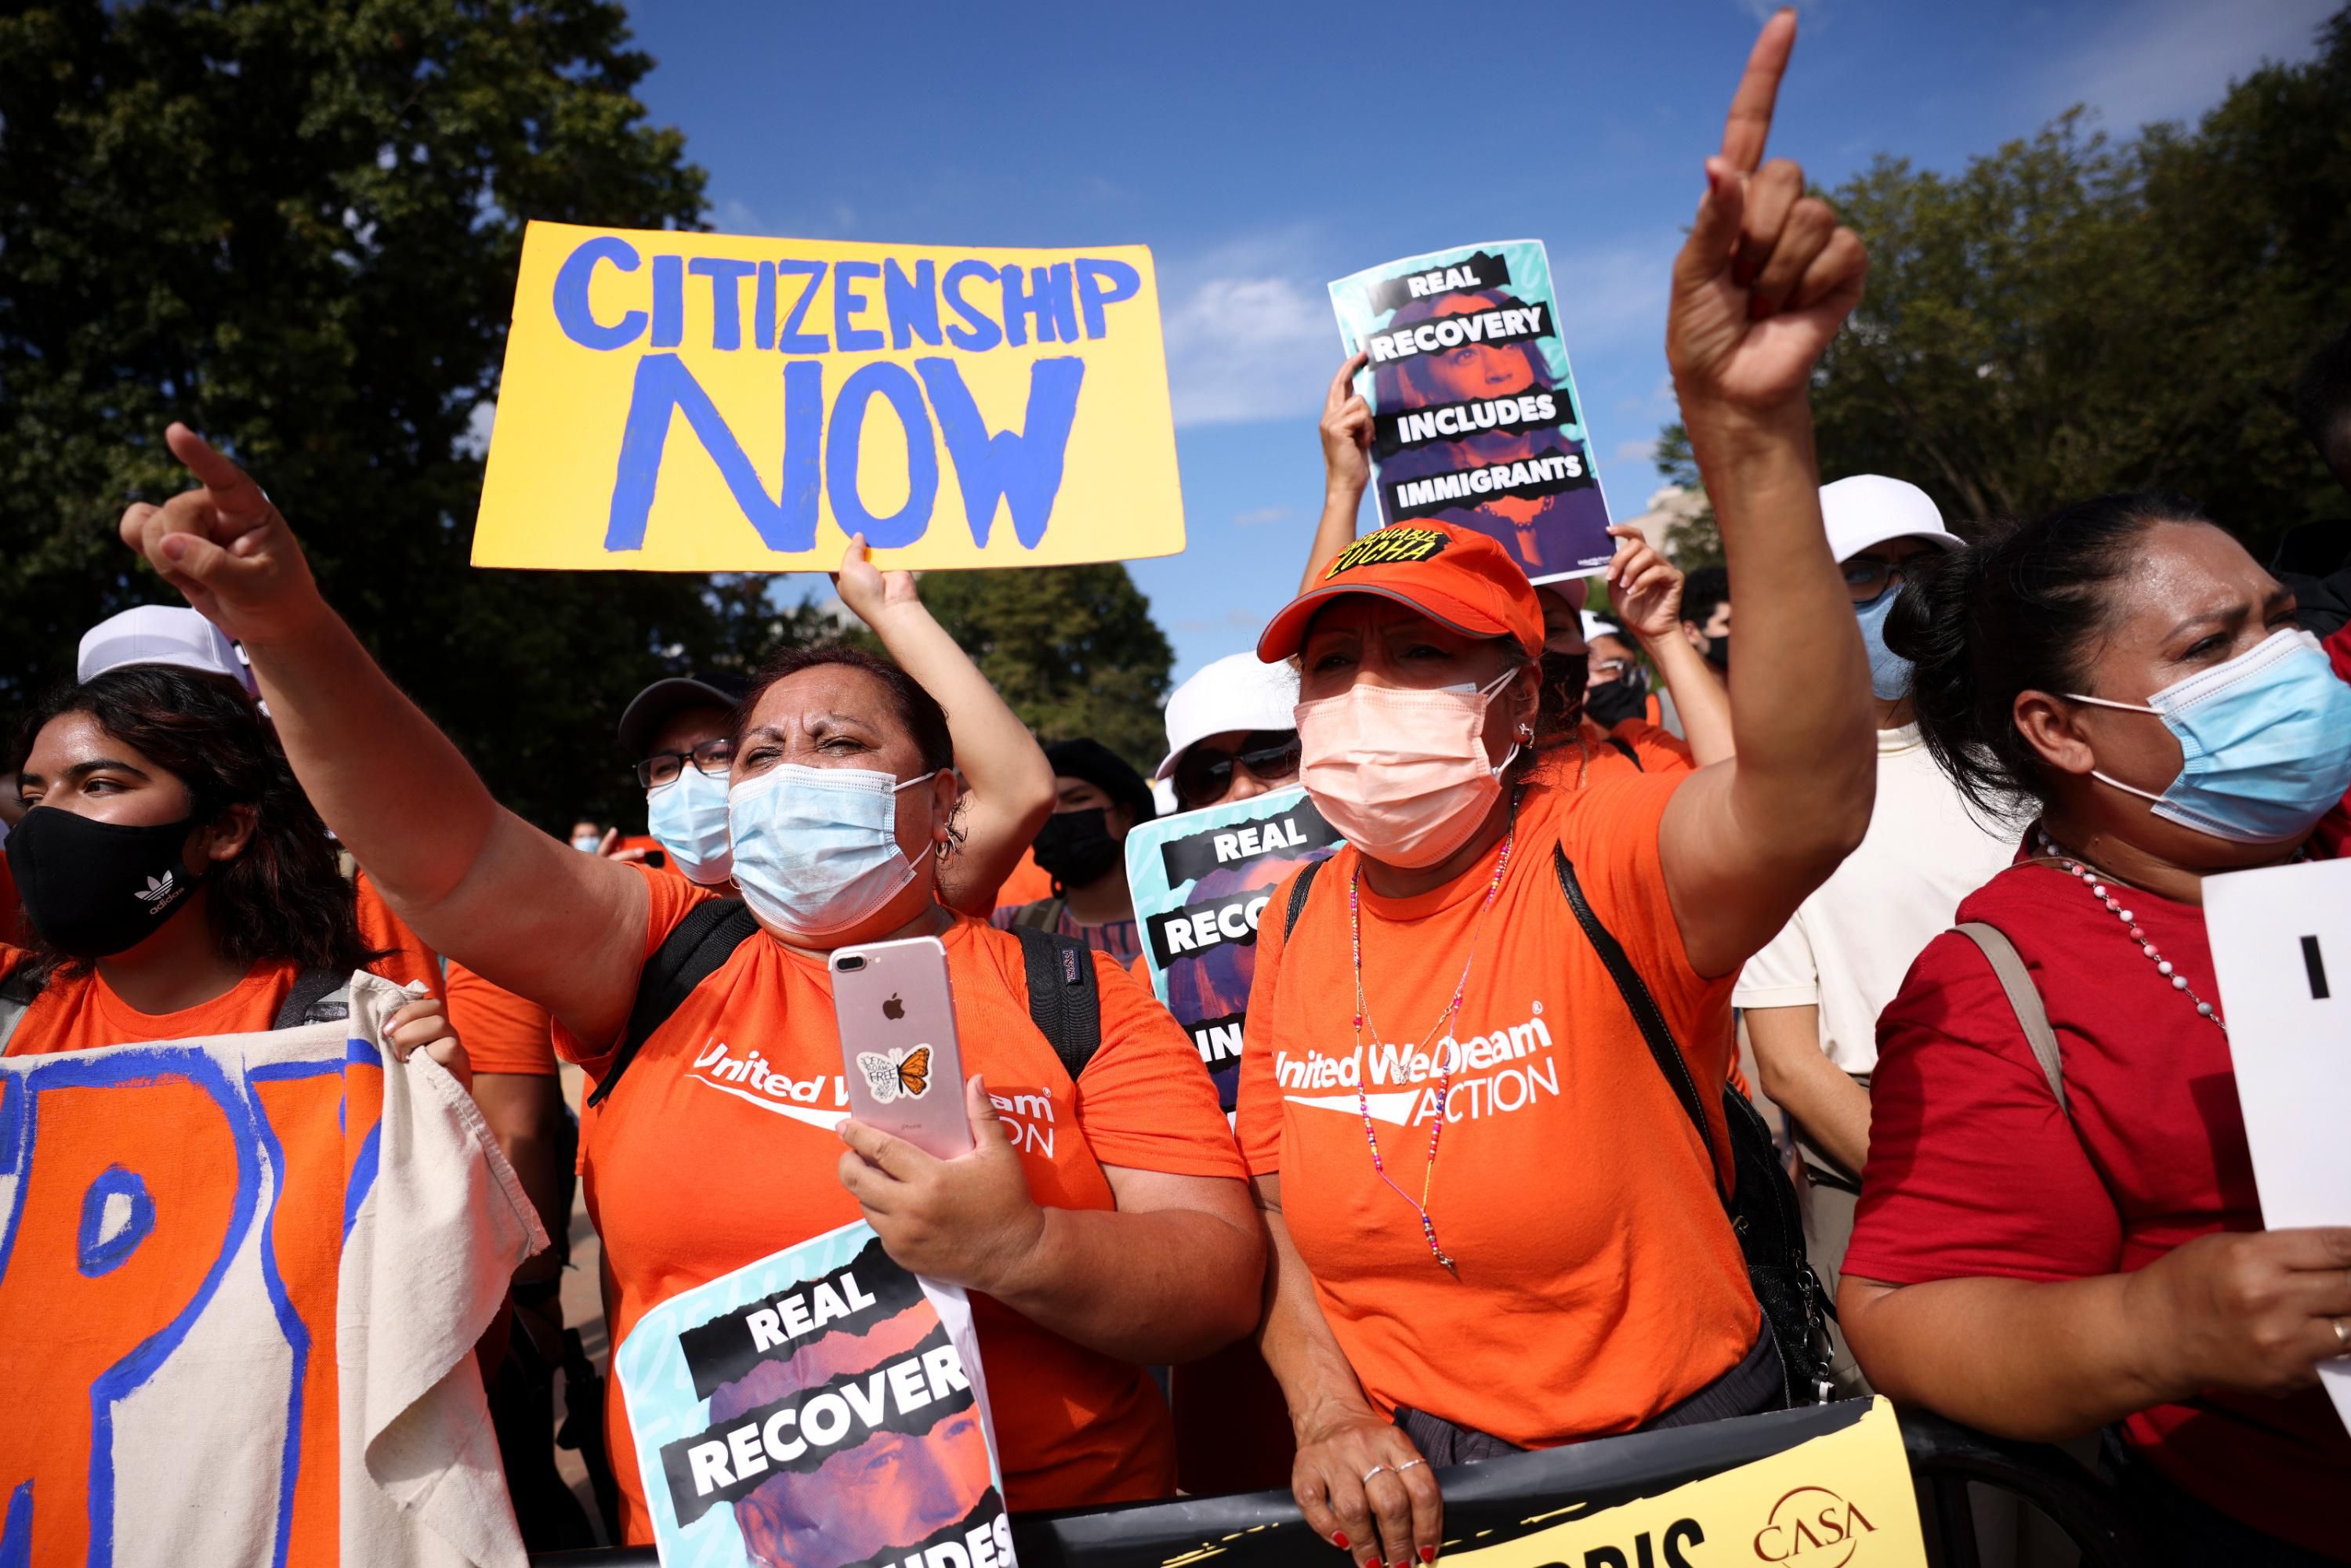 Immigrant rights activists protest in Washington, D.C.